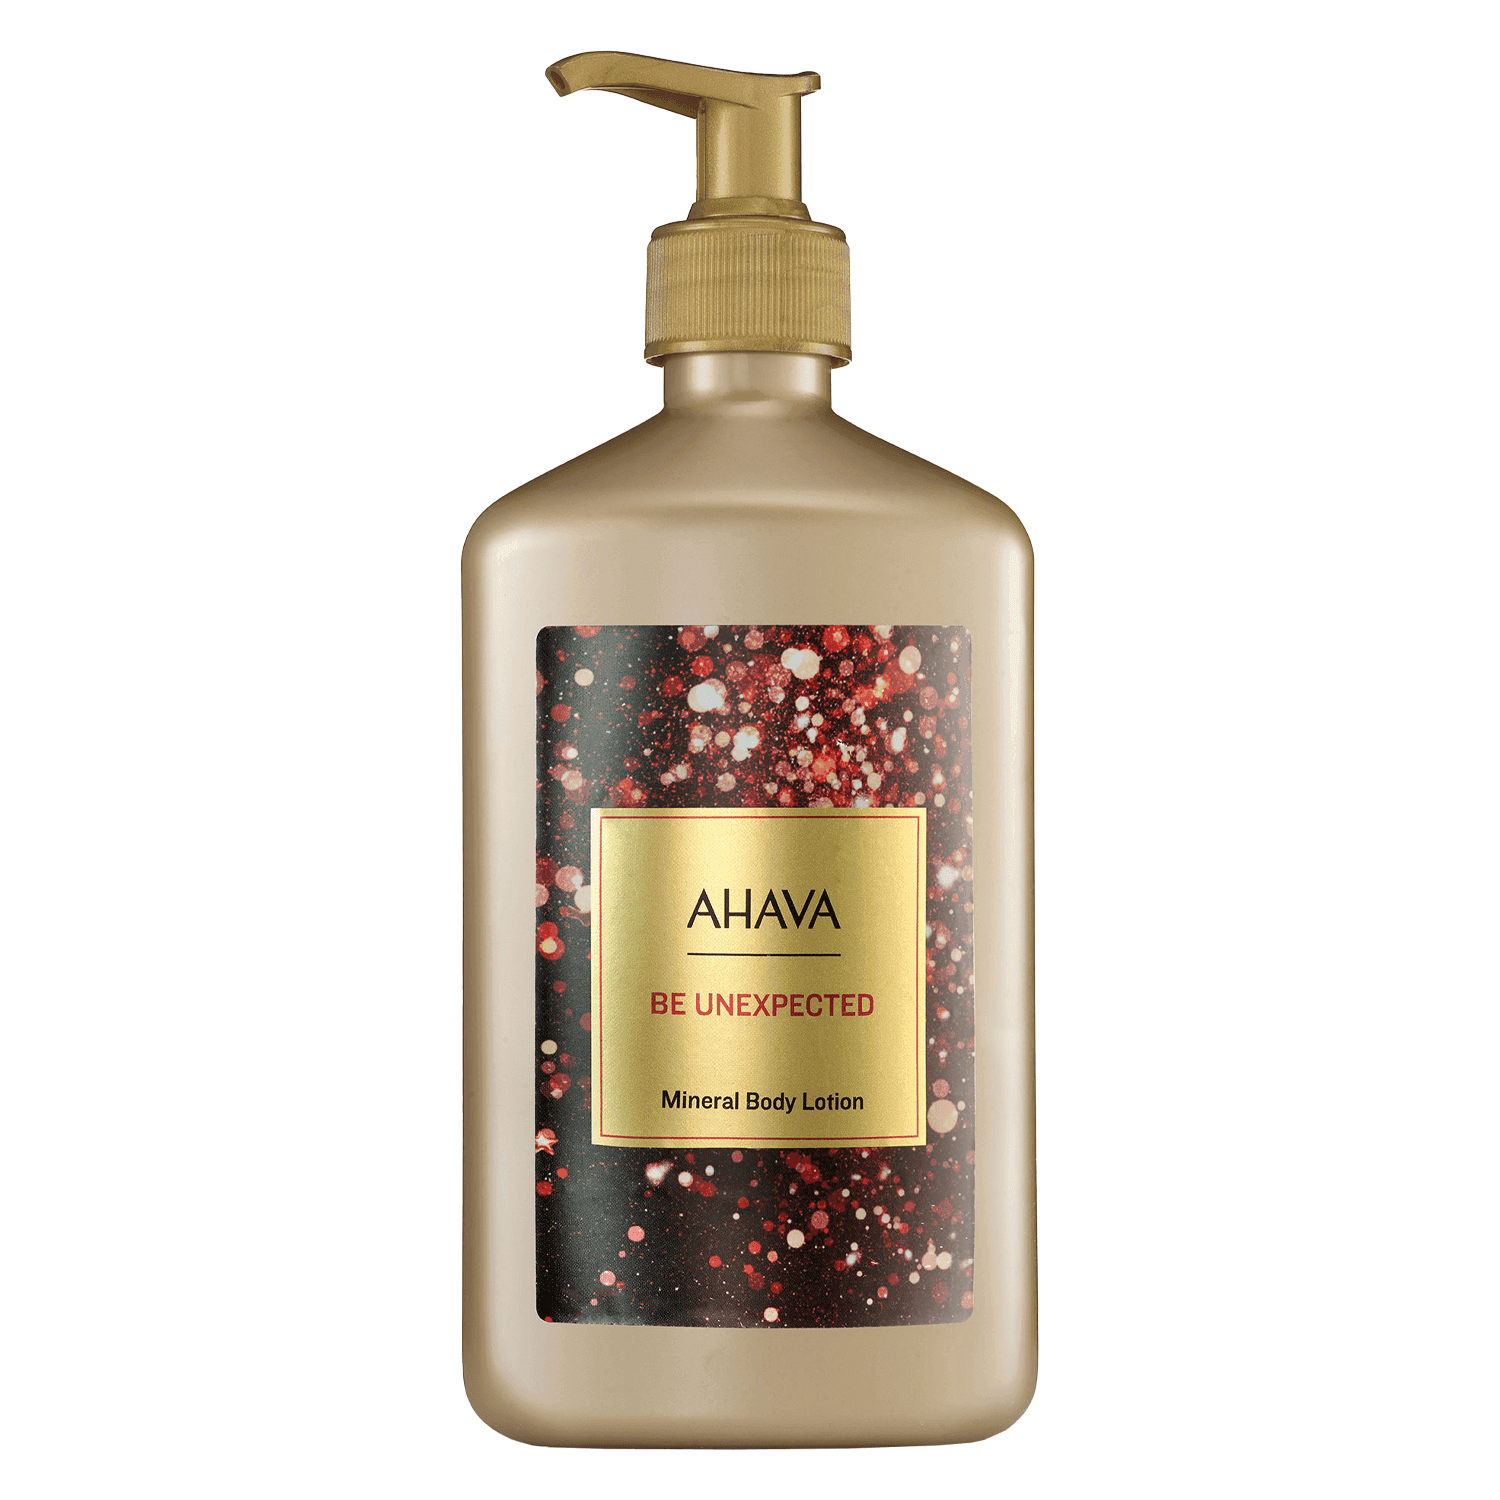 Ahava Specials - Mineral Body Lotion Be Unexpected Limited Edition